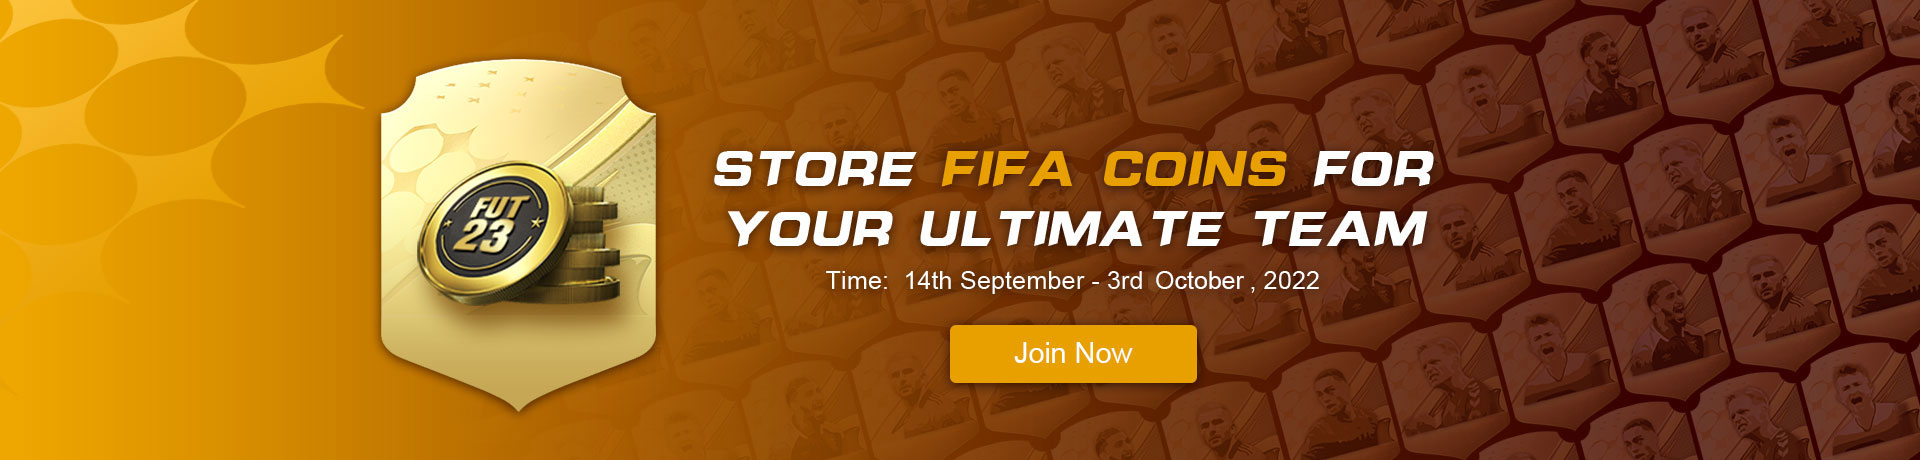 STORE FIFA COINS FOR YOUR ULTIMATE TEAM